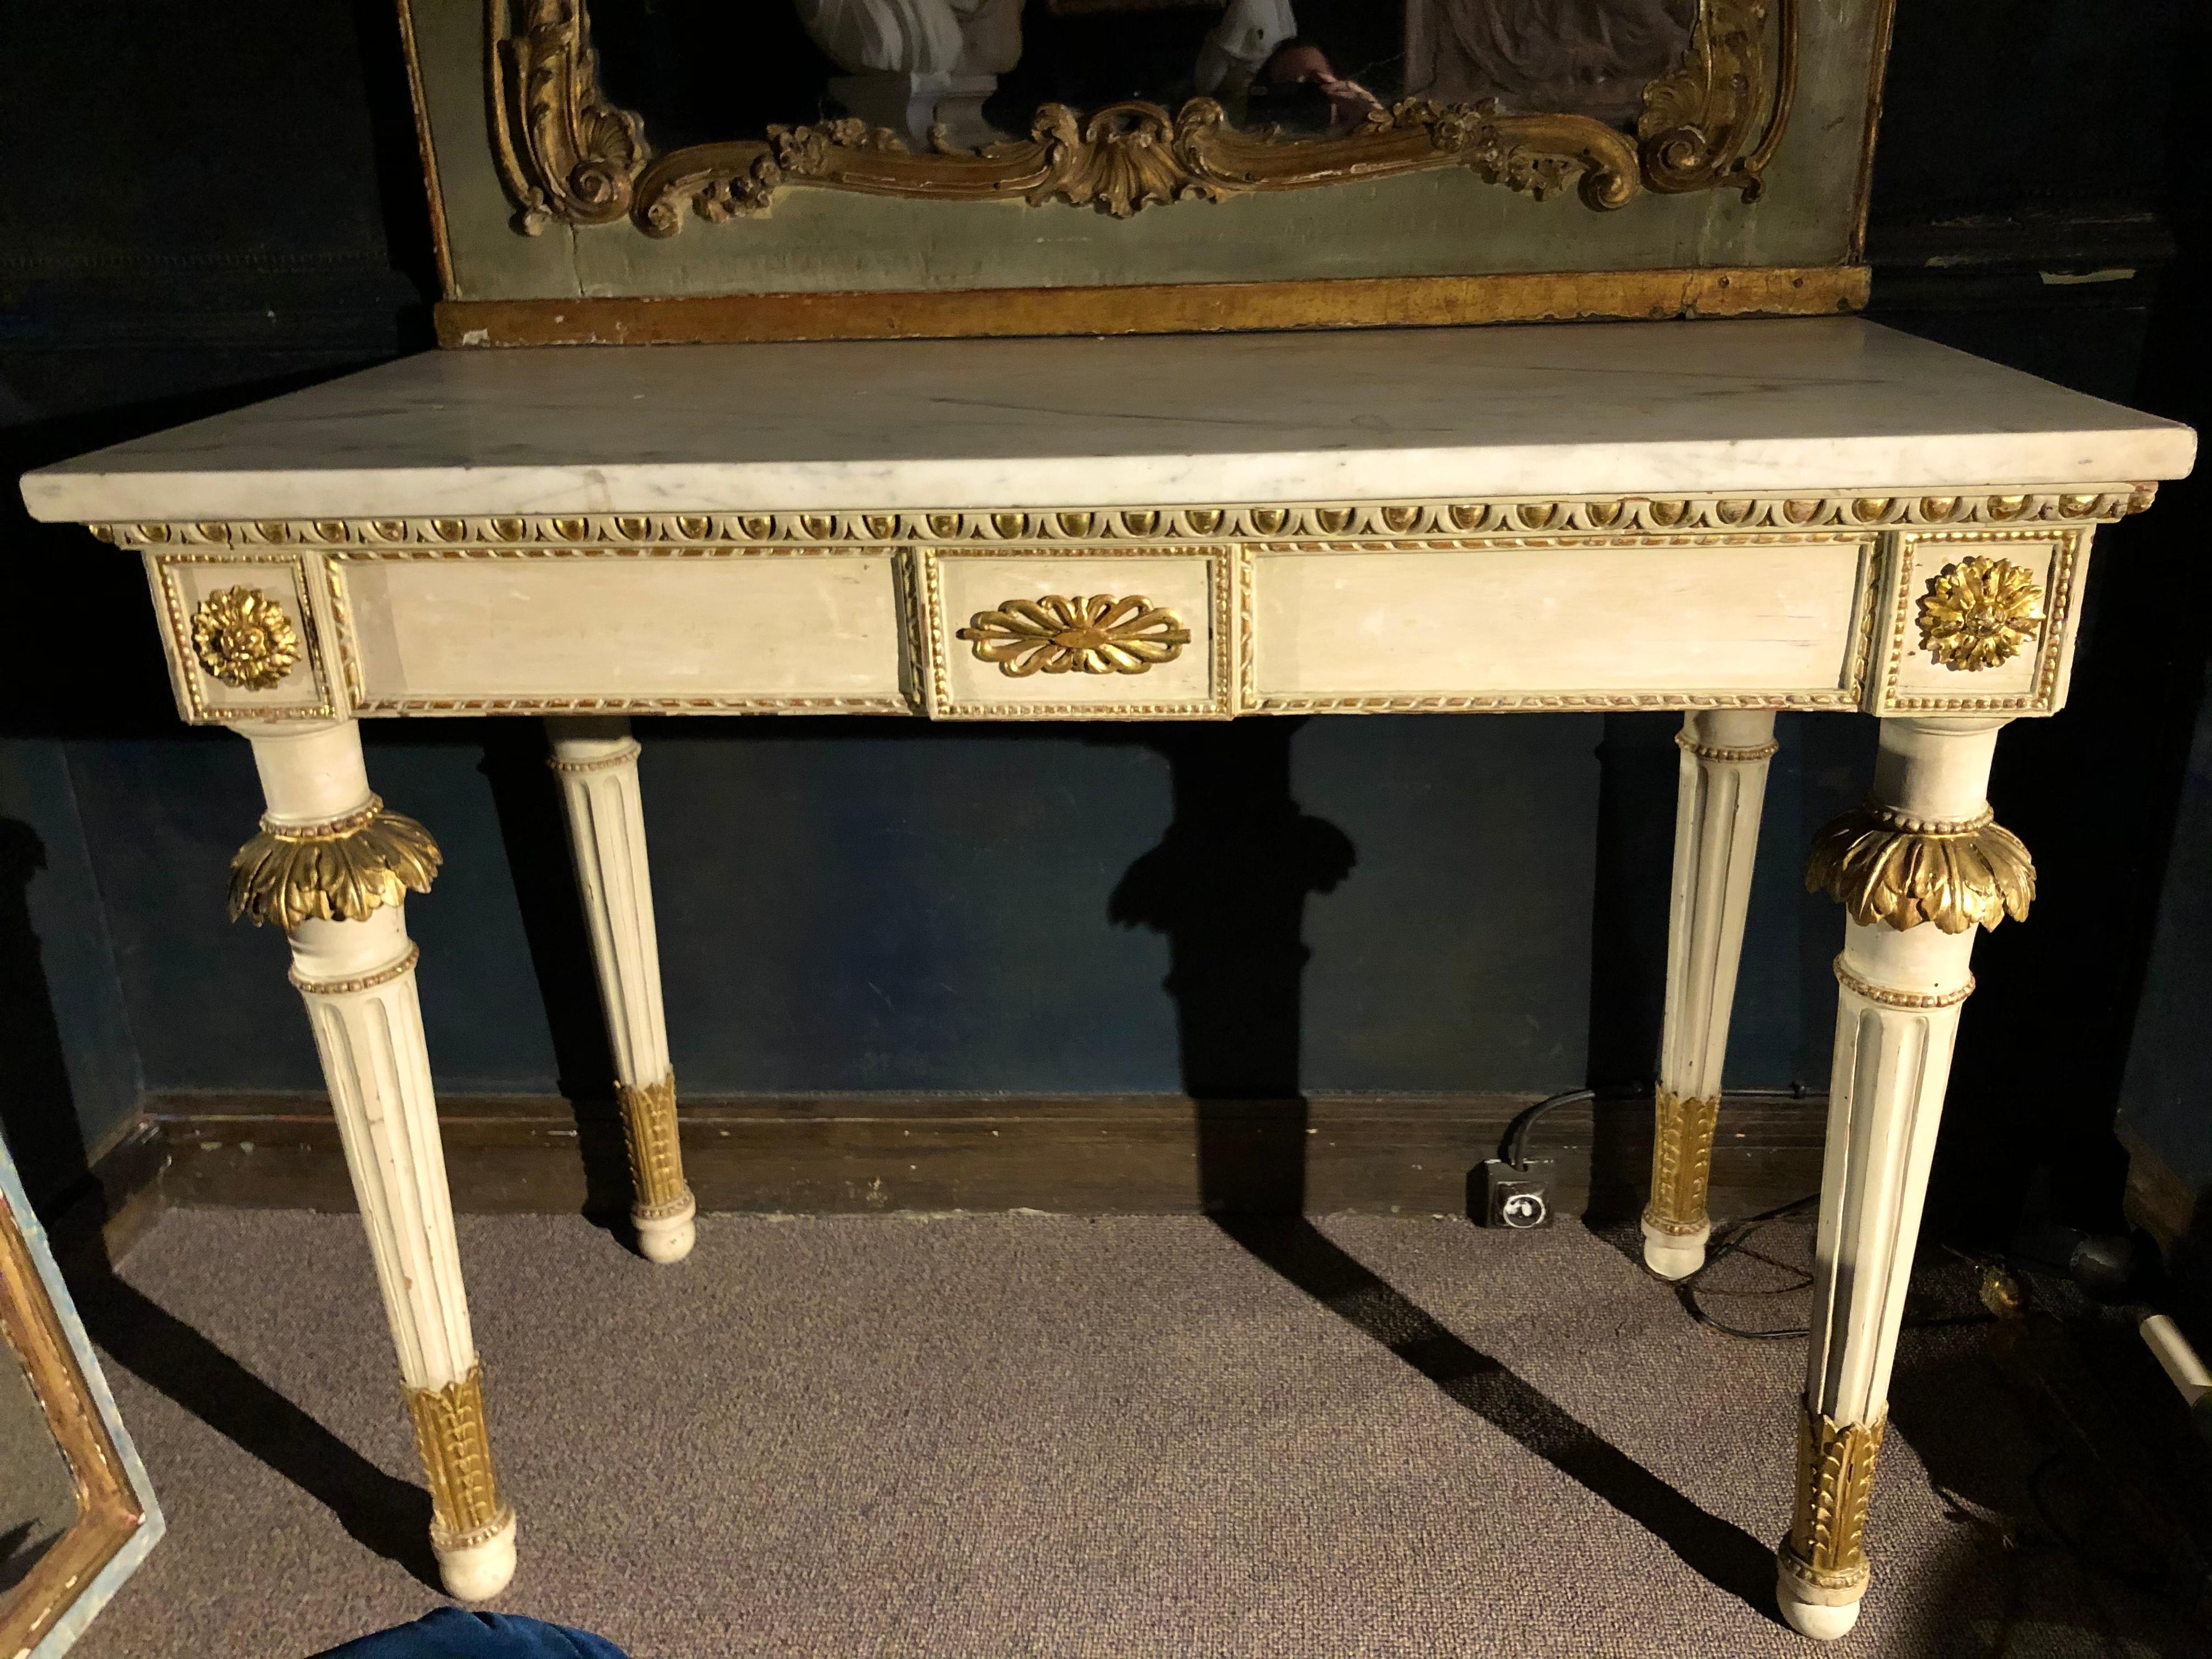 Neoclassical Tuscan console in painted and gilded wood, 
original beautiful Carrara marble top,
circa 1800
Italy.